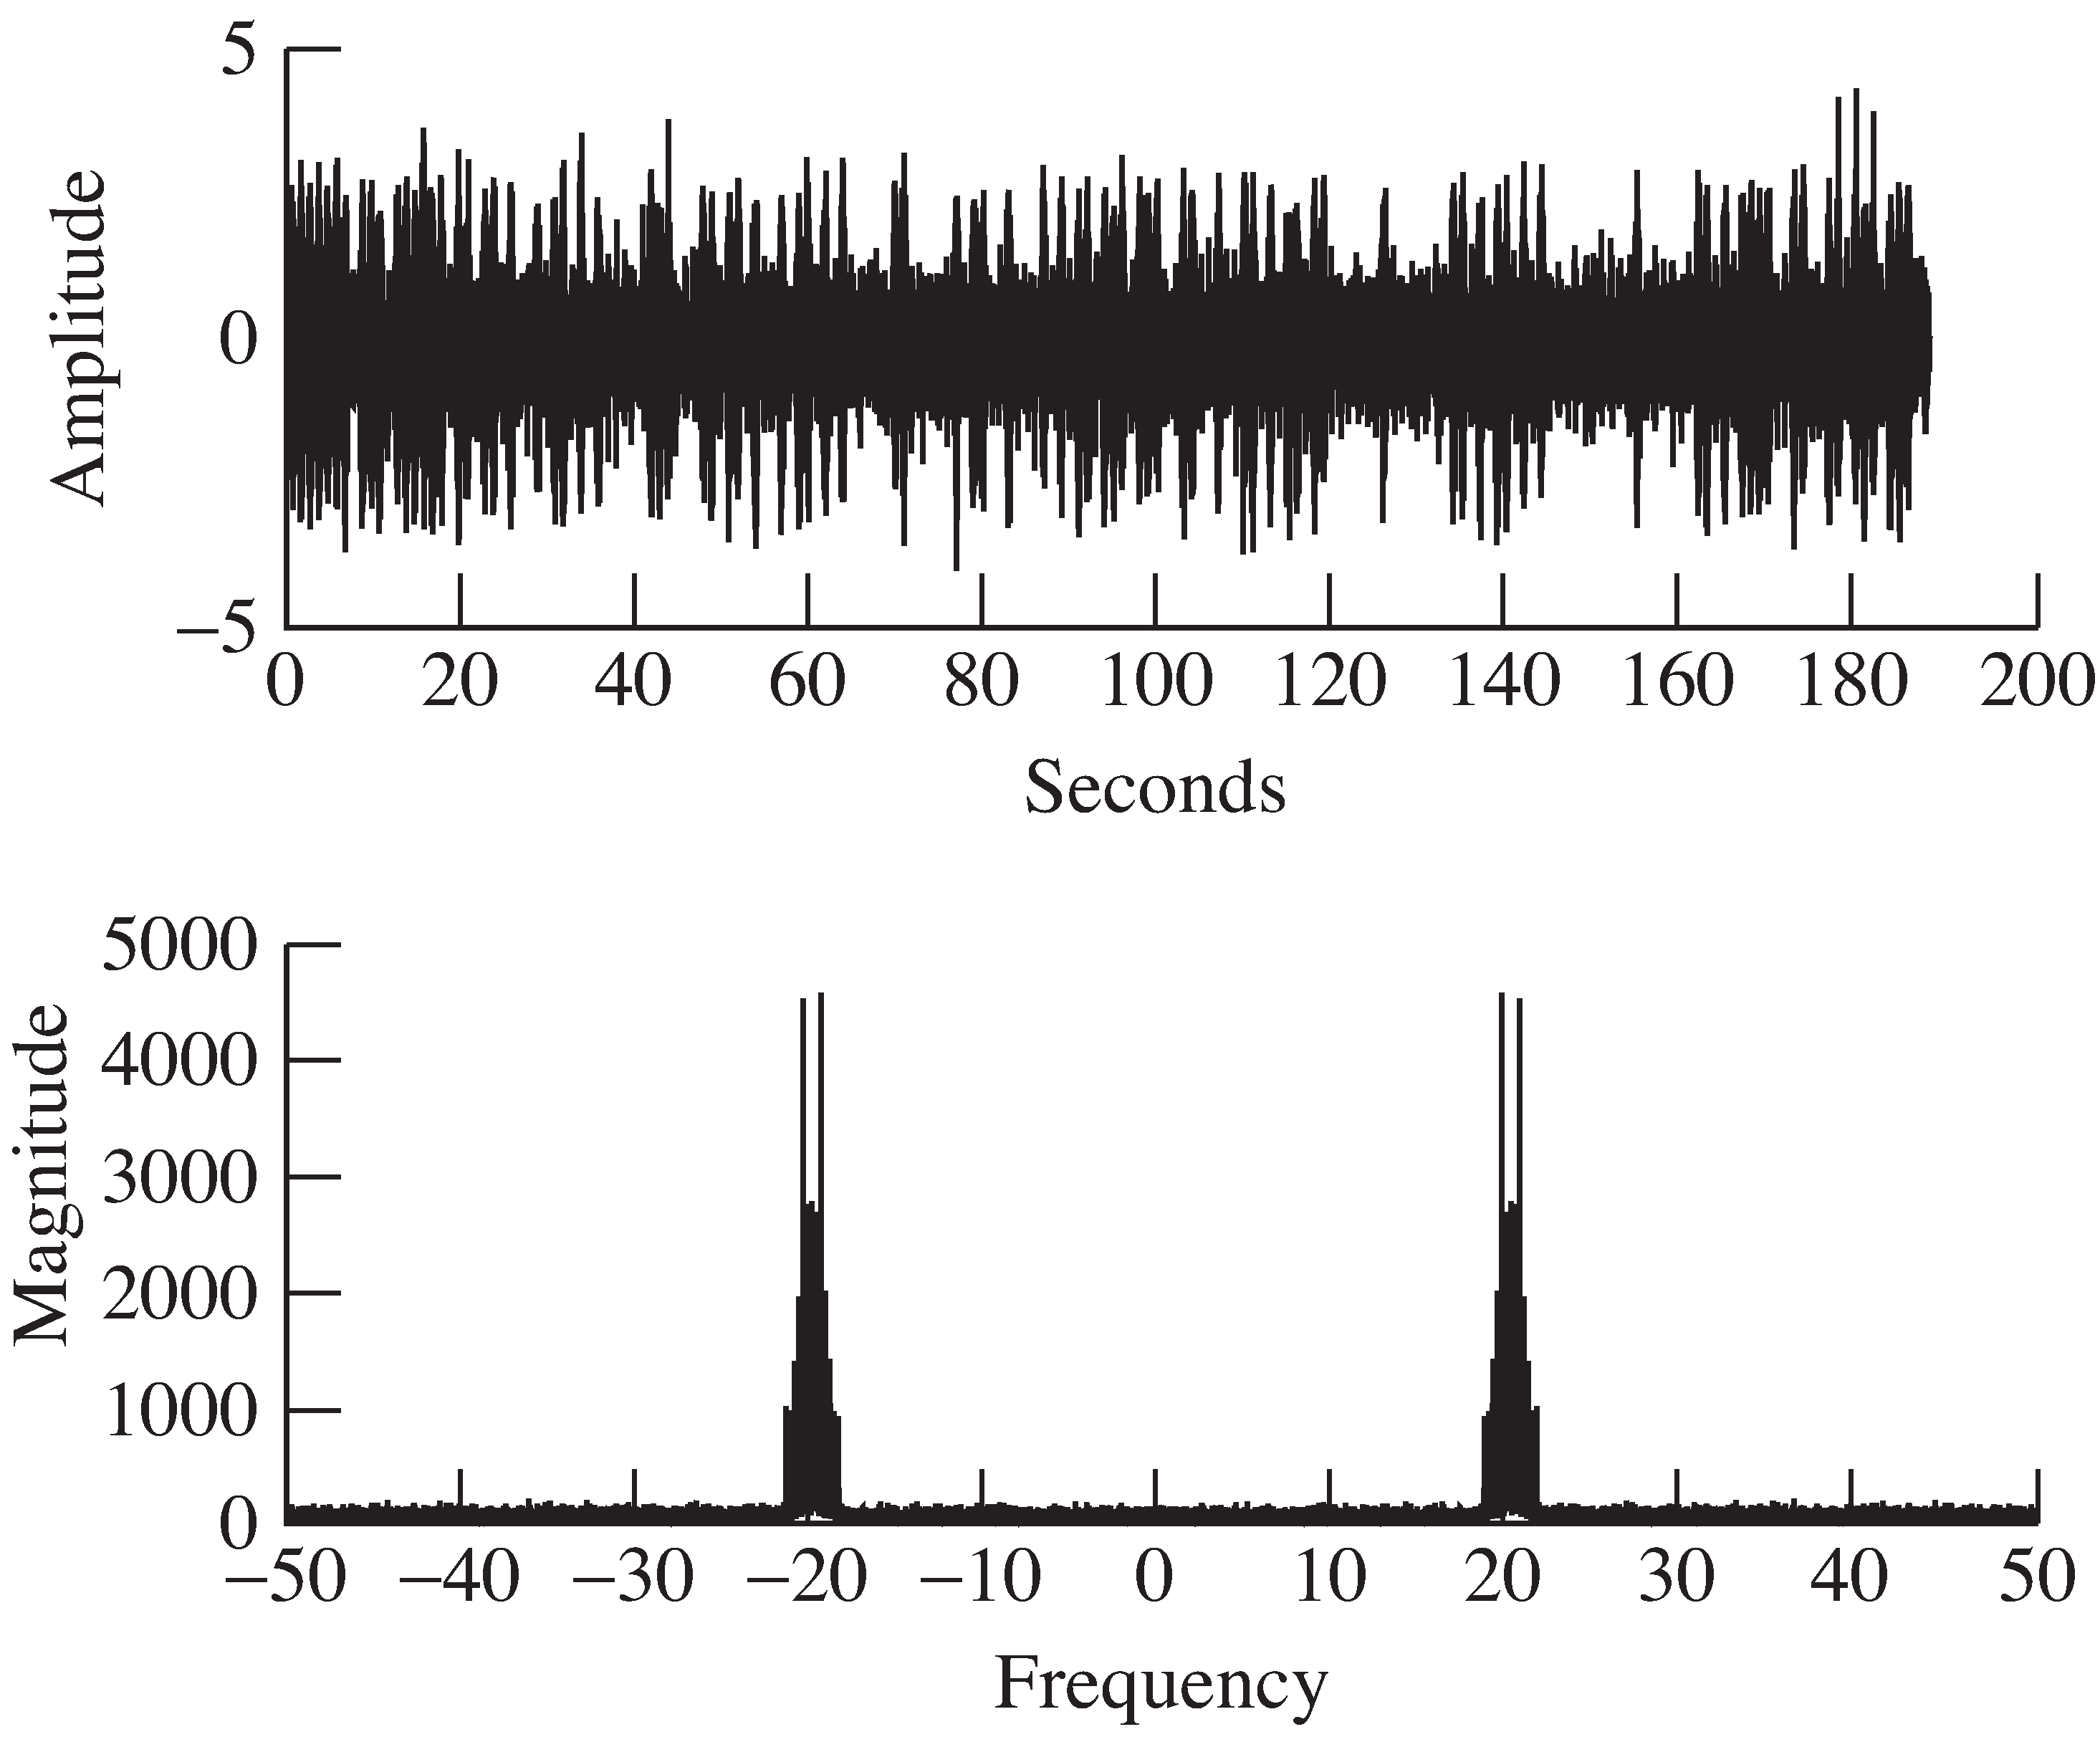 When noise is added, the received signal appears jittery. The spectrum has a noticeable noise floor.